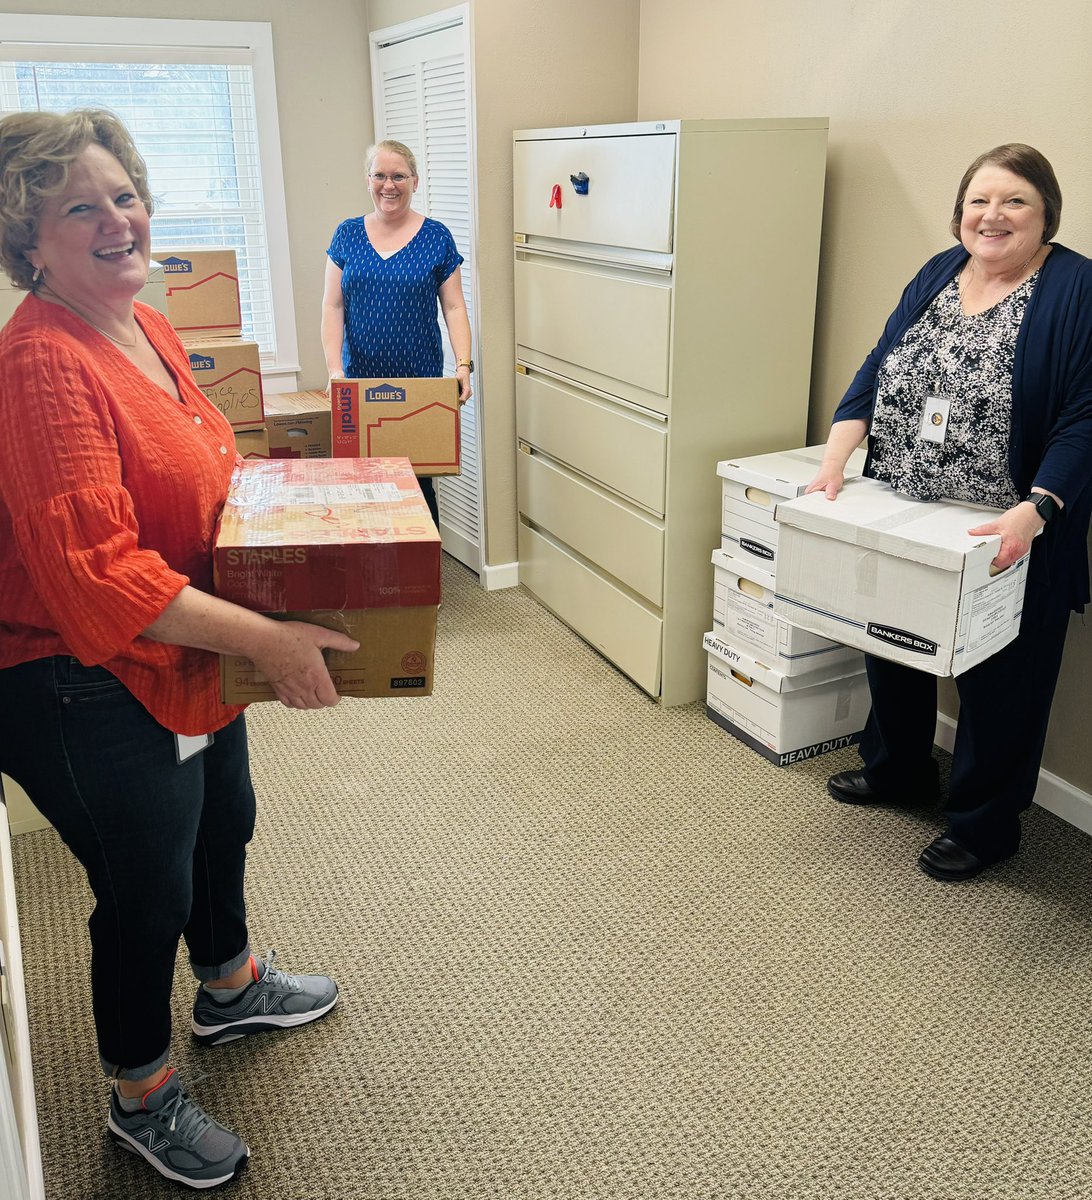 We moved! Human Resources (HR) and Code Enforcement have switched places! HR is back on the second floor of City Hall (204 Ash St) and Code is on the second floor of the Peck Center (510 S 10th St).